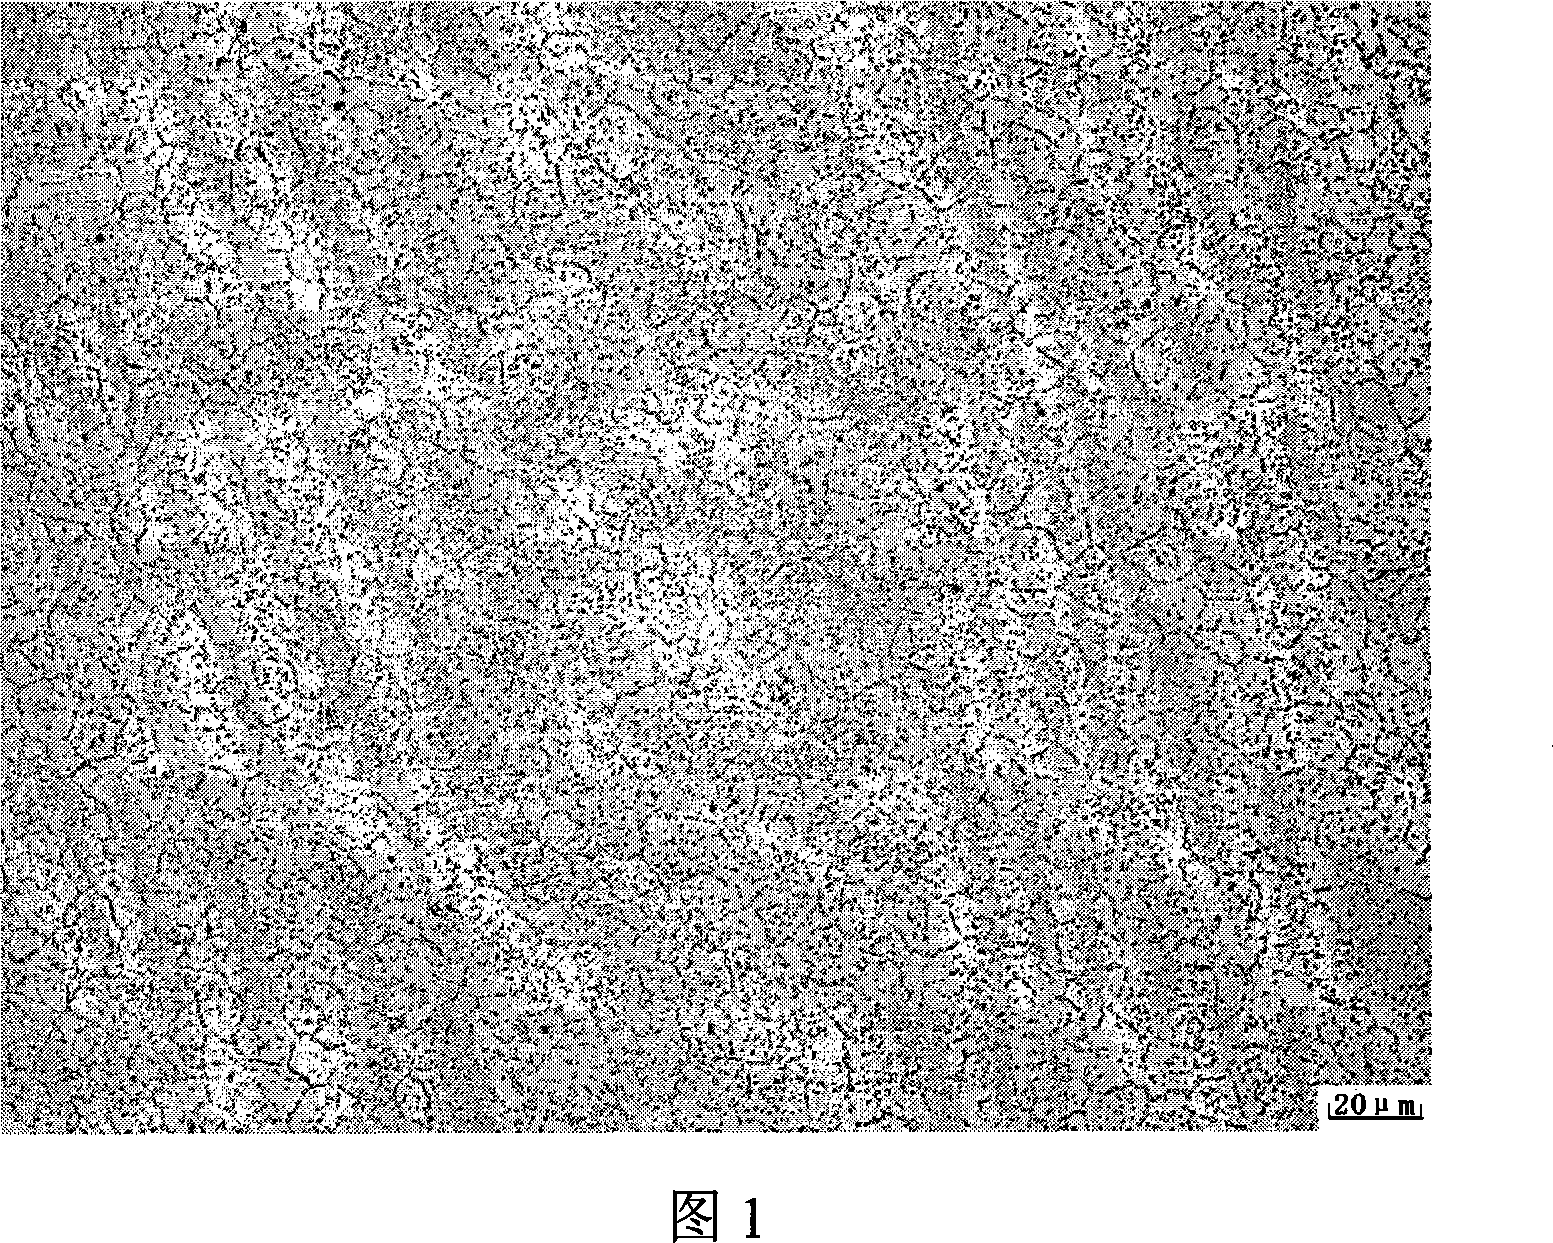 Novel stainless bearing steel and method for manufacturing same